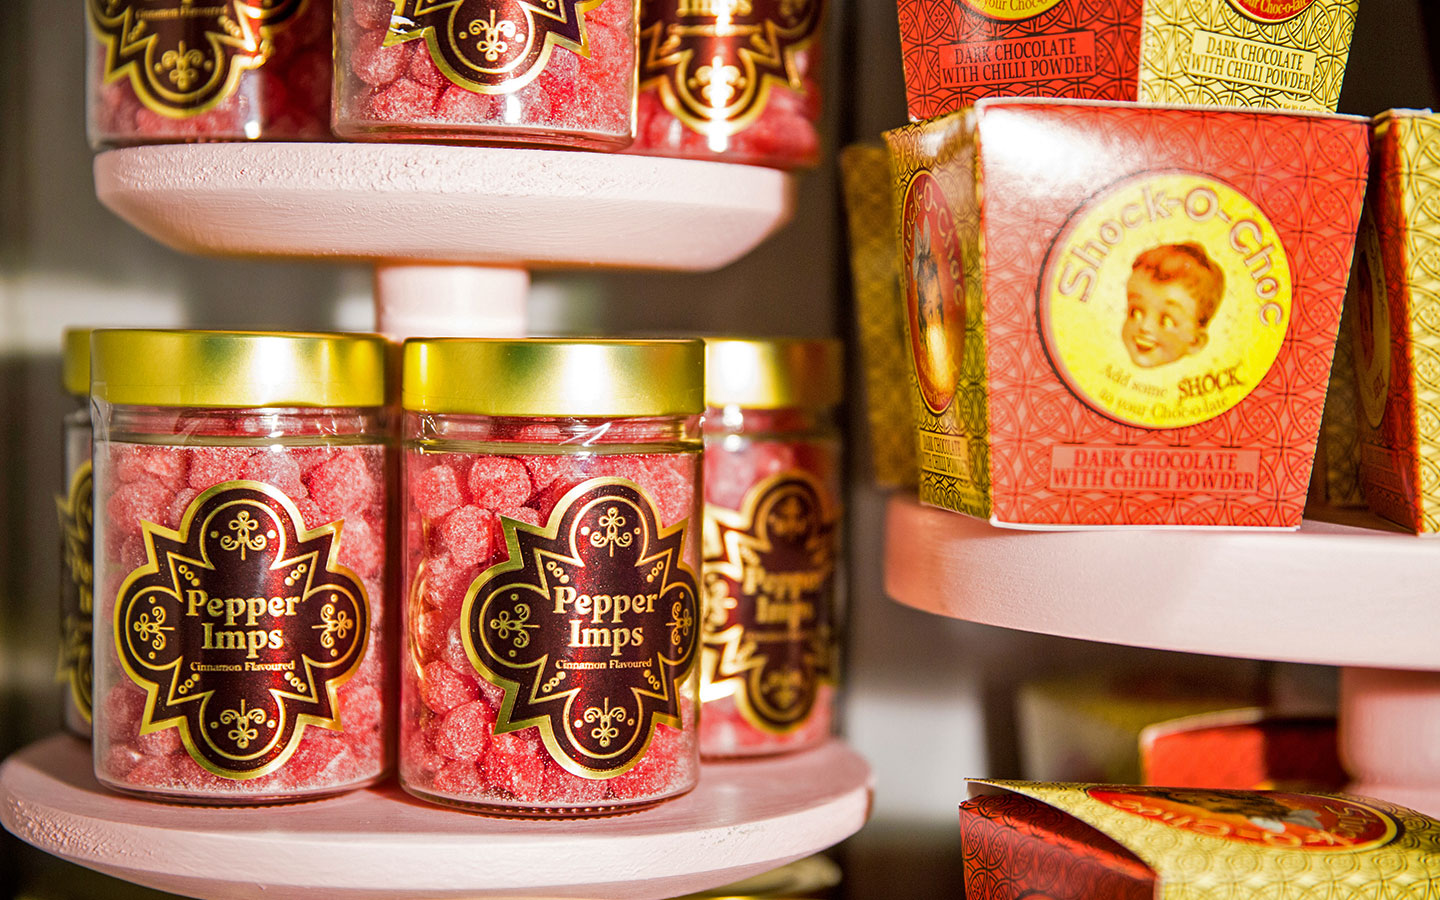 Grab some Pepper Imps at Sugarplum's sweet shop now open in The Wizarding World of Harry Potter - Diagon Alley